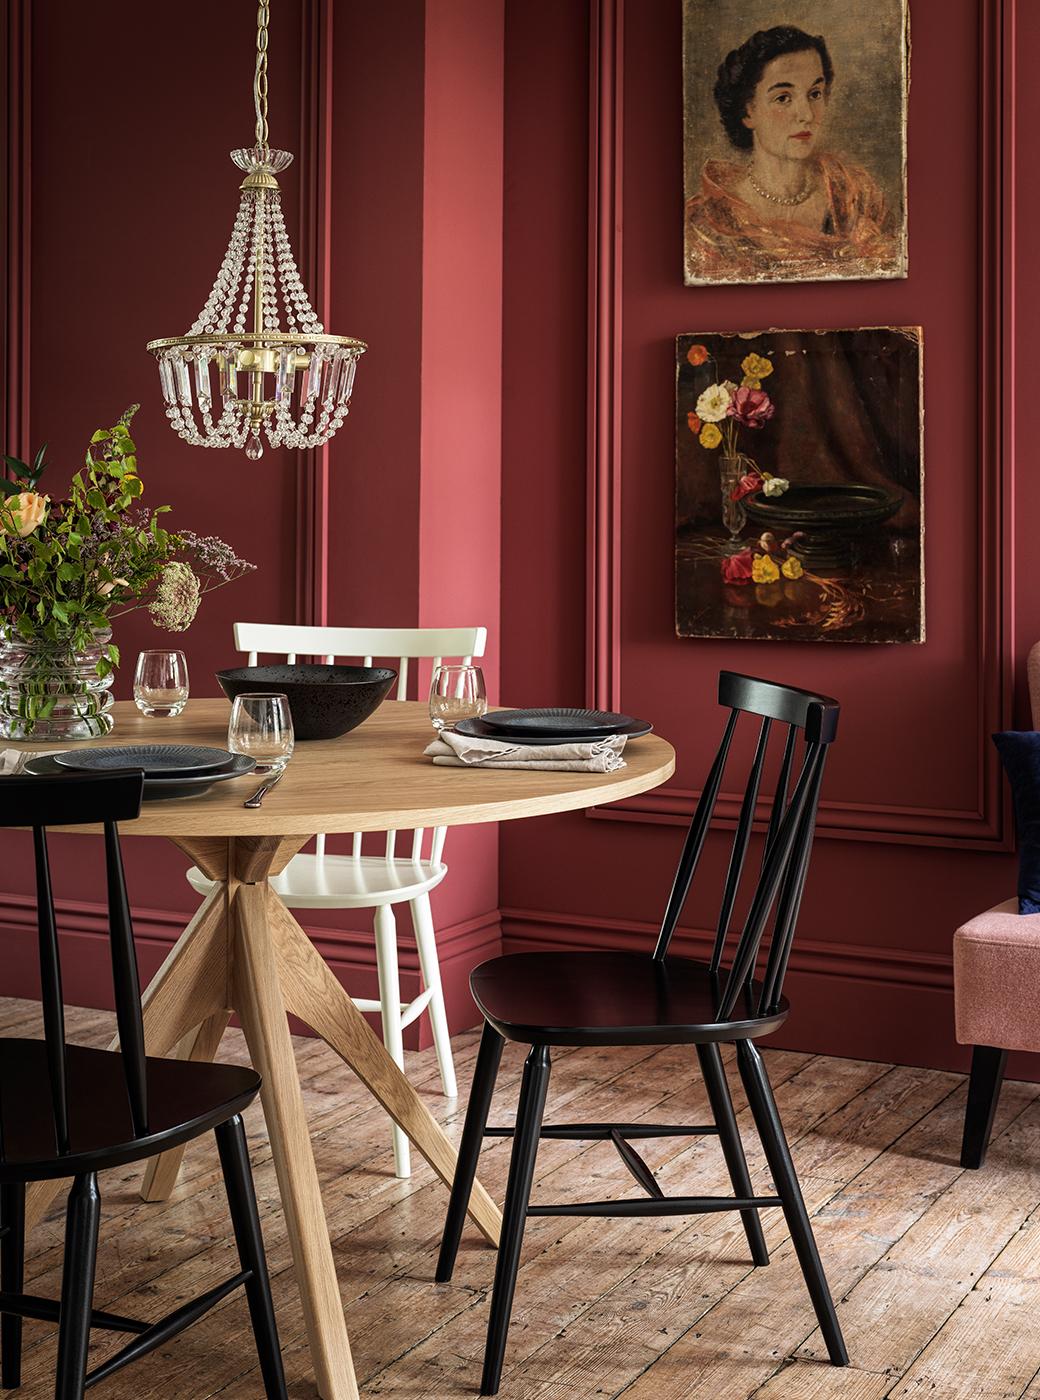 Black and cream dining chairs around light oak dining table with maroon walls in the background.